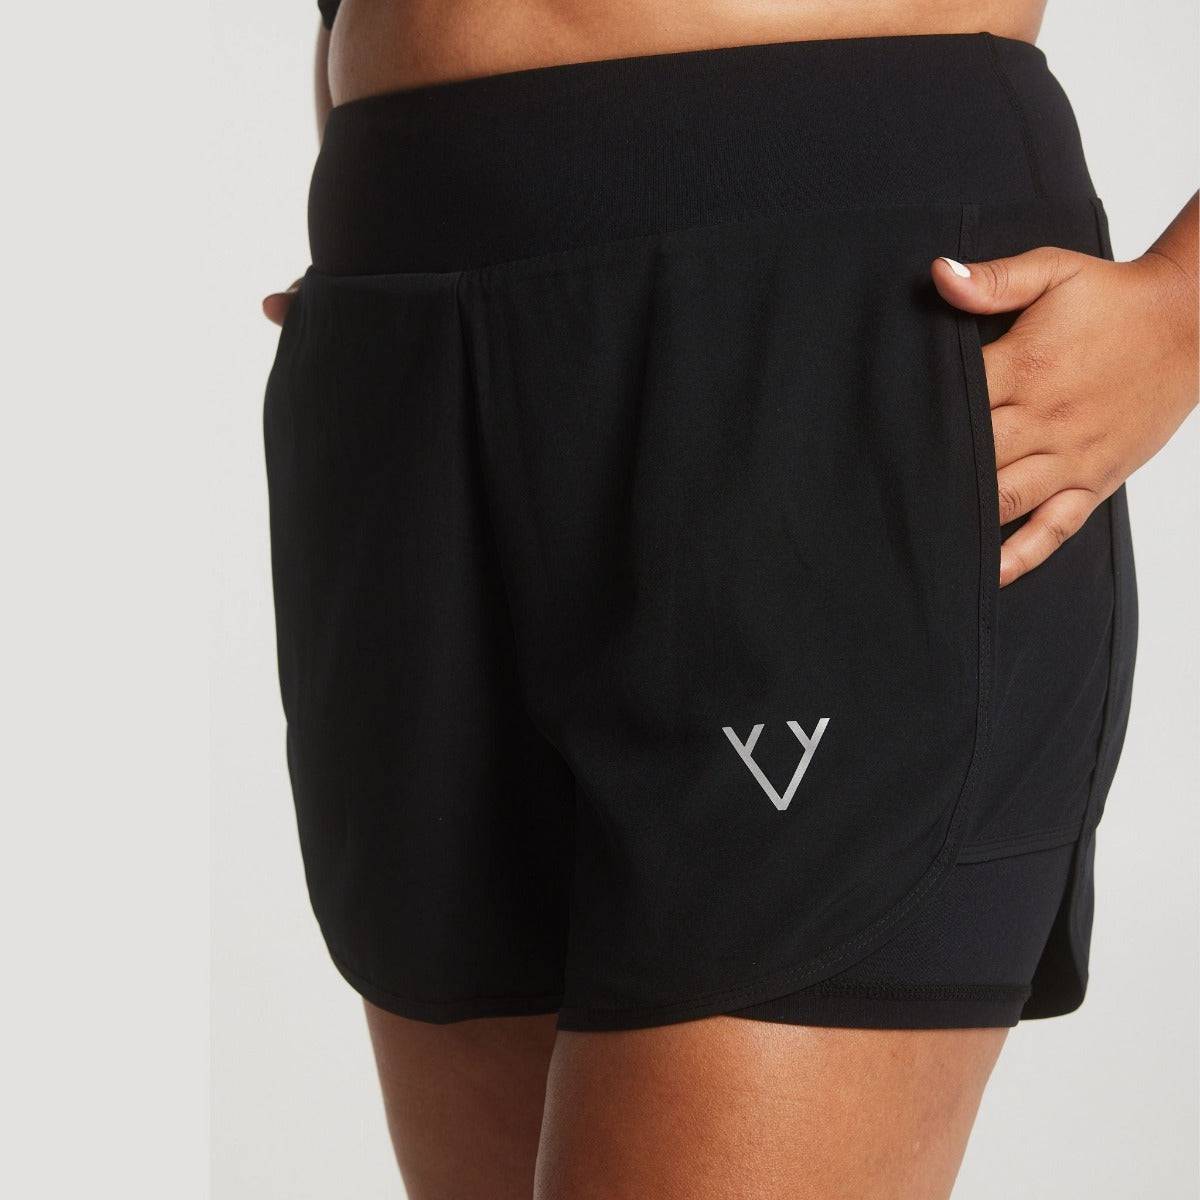 Victoria Stag's Core Running Shorts that has Extra Stomach Support